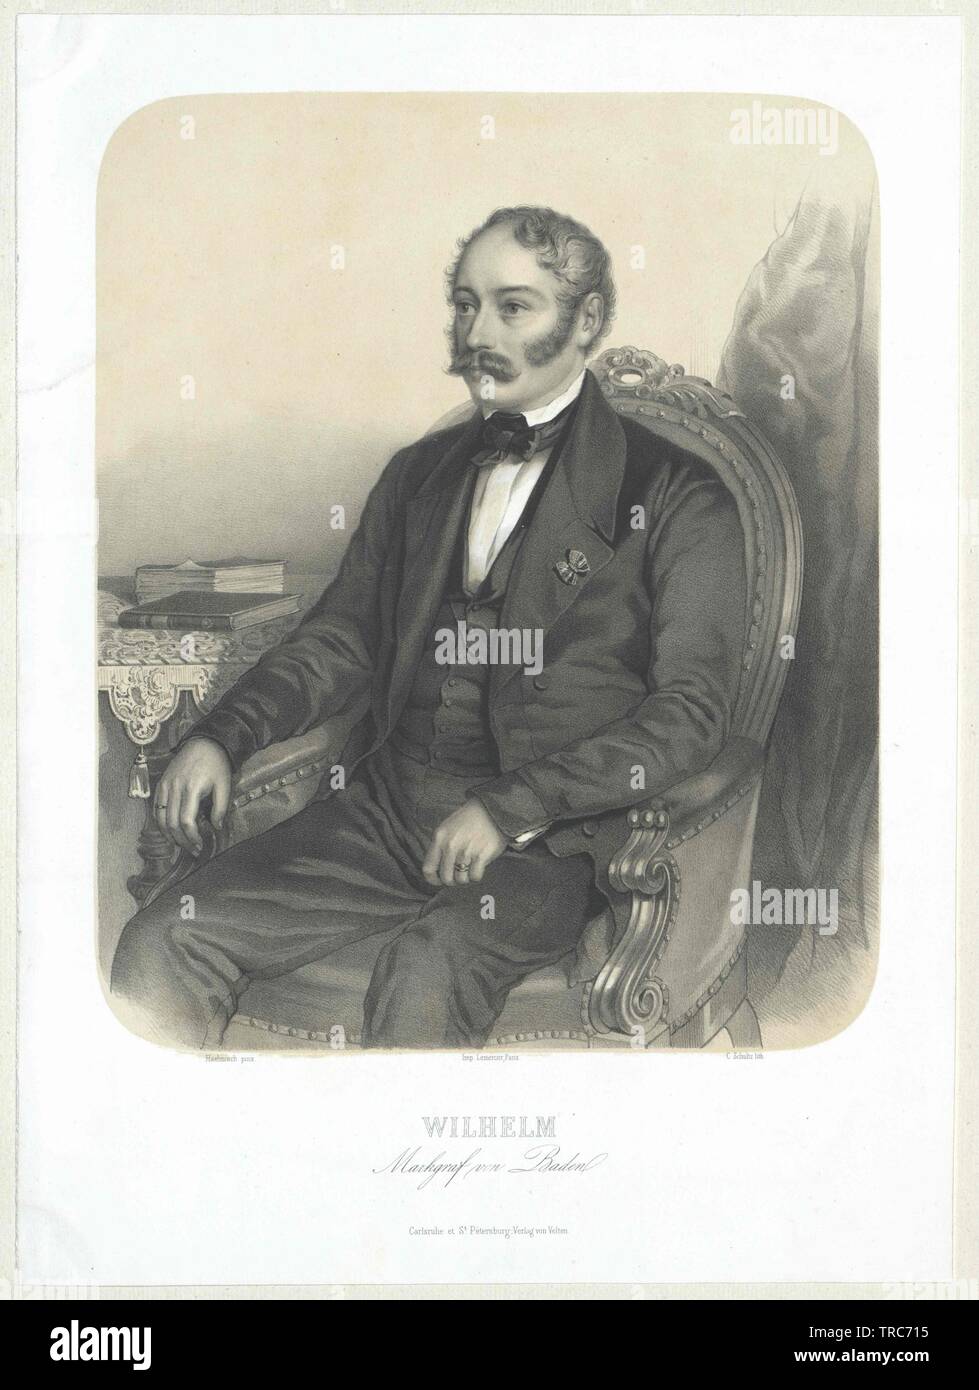 Wilhelm, Markgraf von Baden, Additional-Rights - Clearance-Info - Not-Available Stockfoto